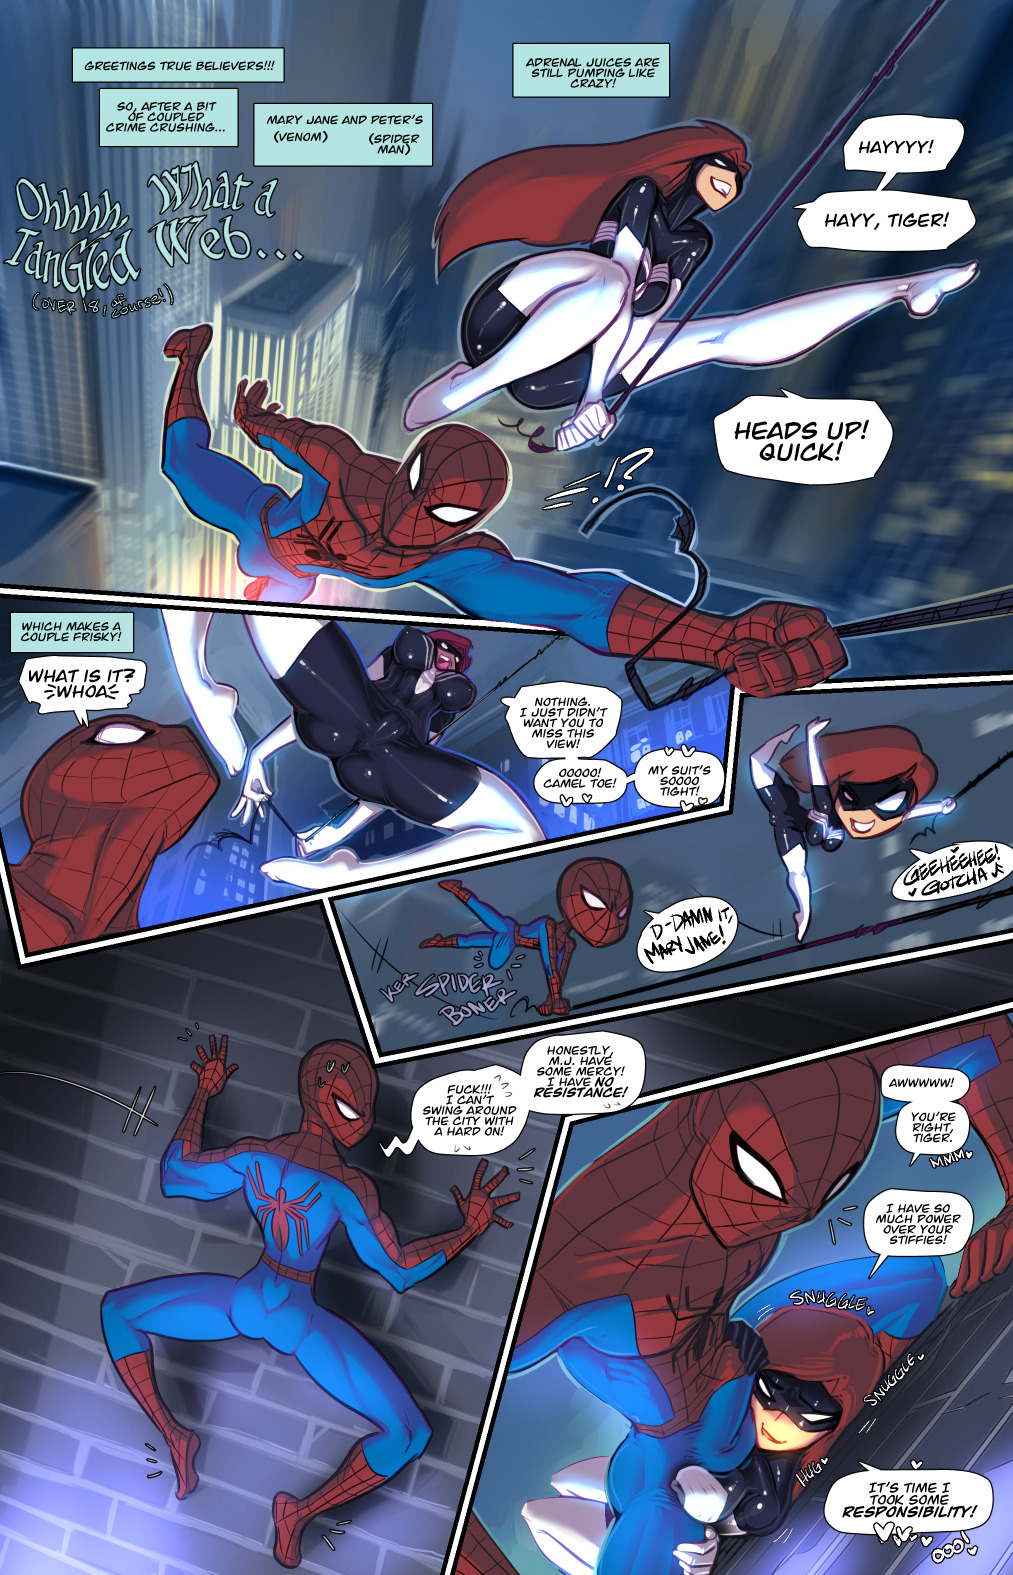 Tangled Web #11 |2 |3 |4 |5 |6 This time around, my patrons wanted to see Mary Jane-Venom